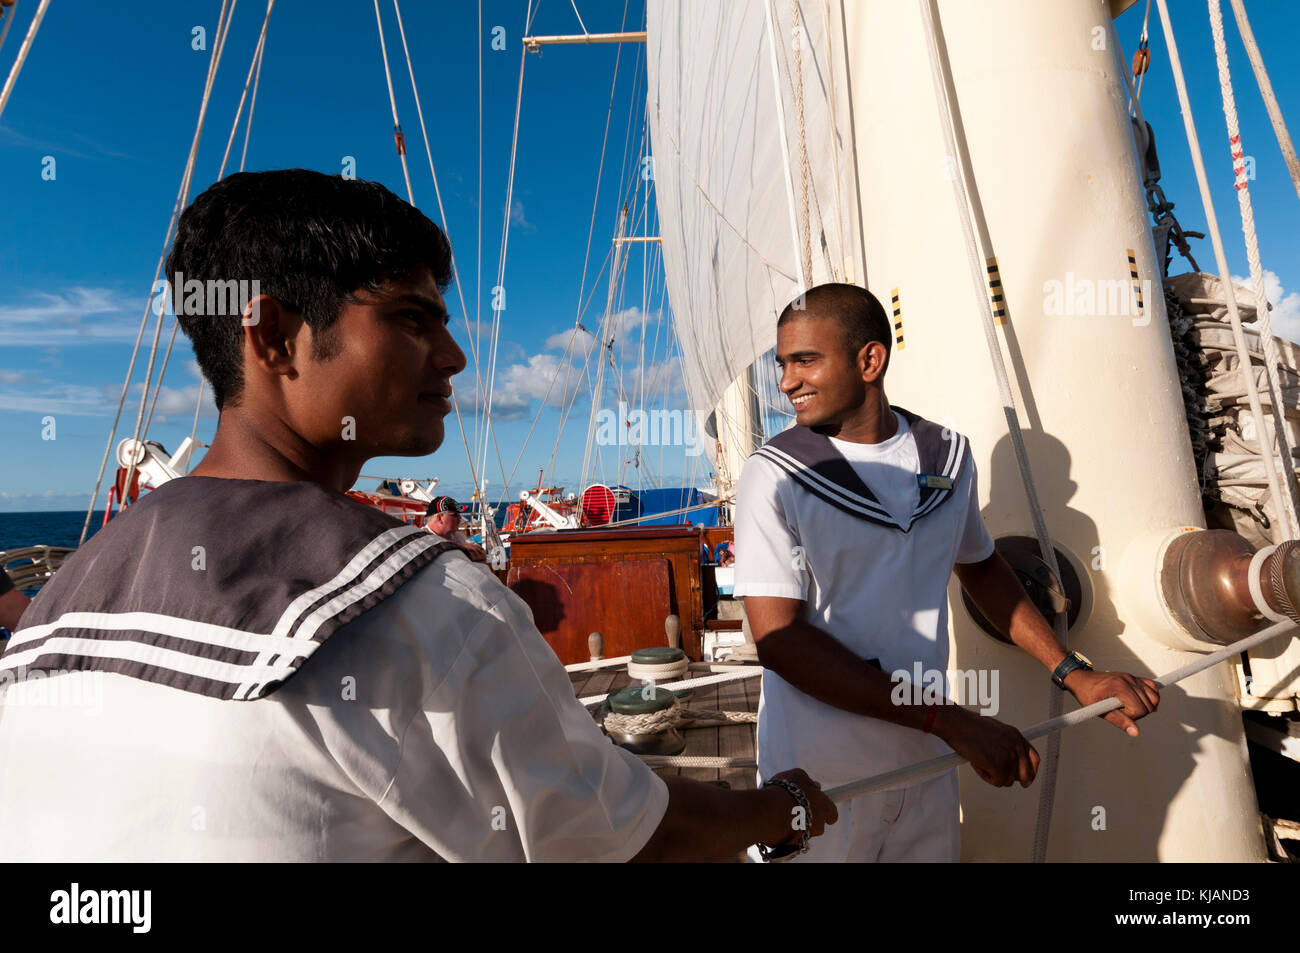 Star Clipper sailing cruise ship, Deshaies, Basse-Terre, Guadeloupe, French Caribbean, France Stock Photo